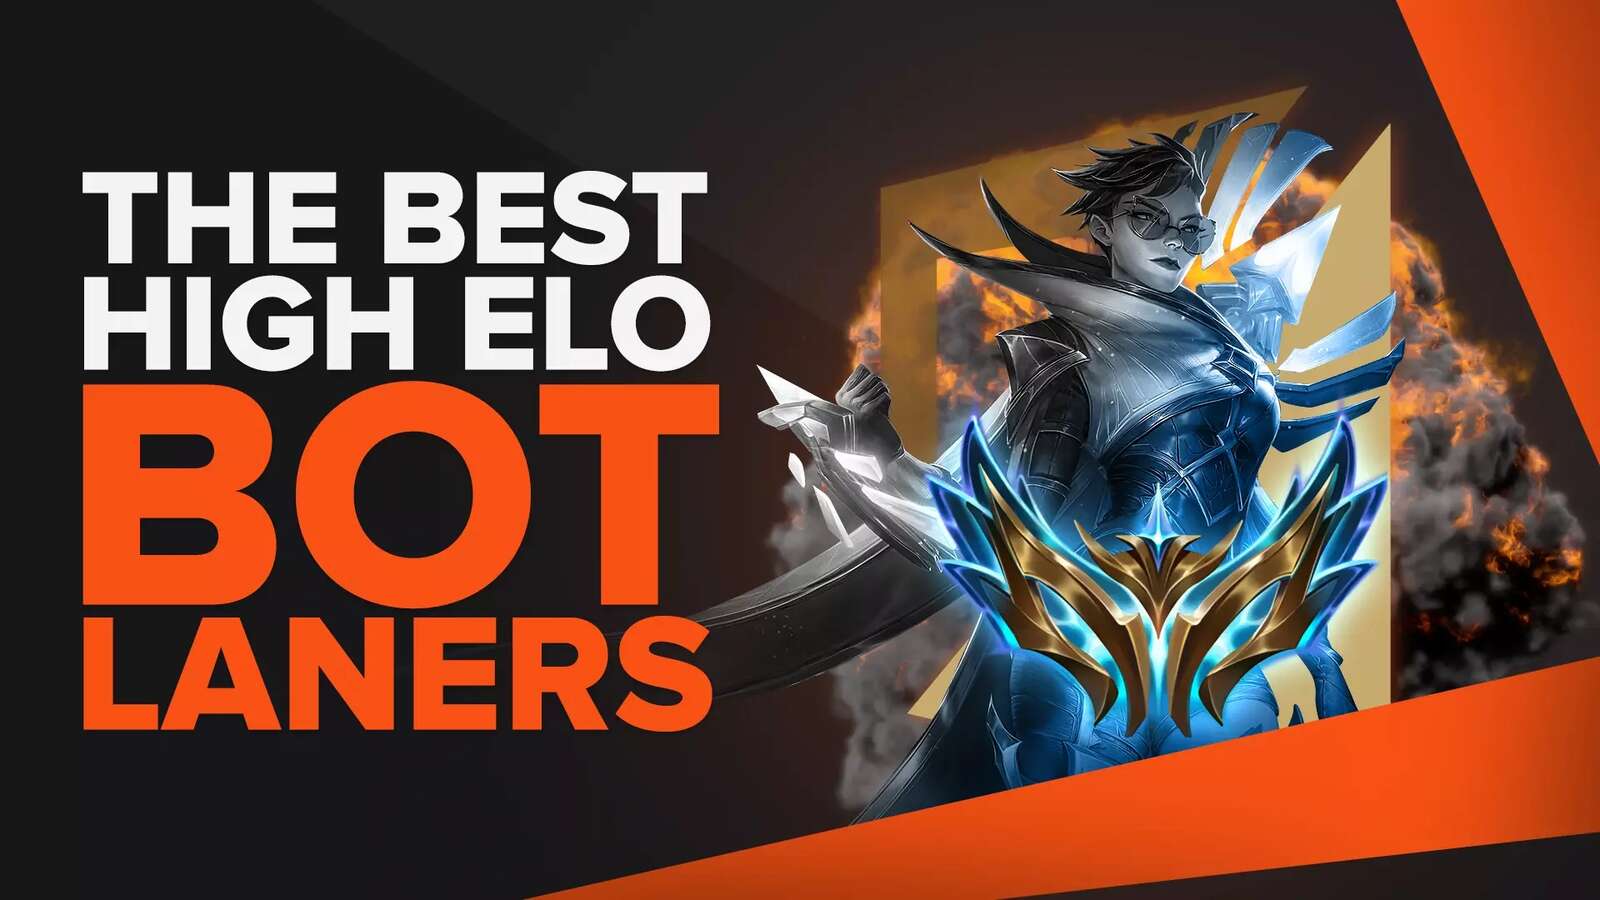 8 Best High Elo Bot Laners to Play in LoL SoloQ